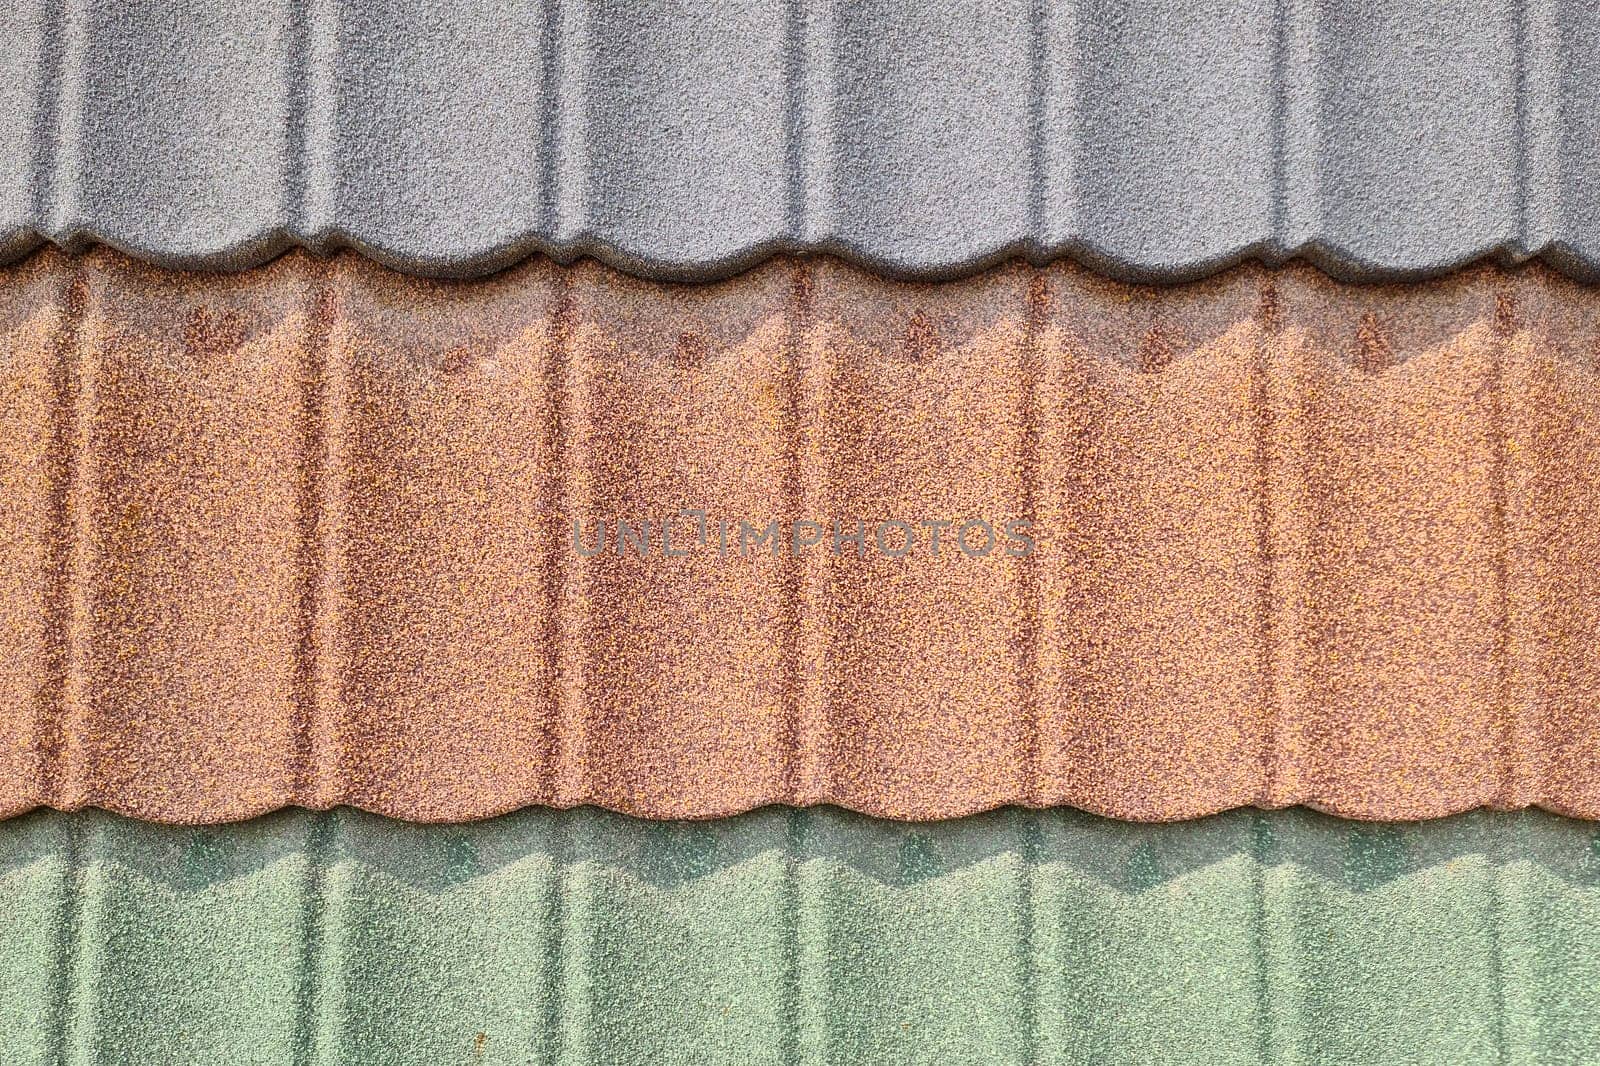 Background of roofing in the form of tiles sprayed in different colors.